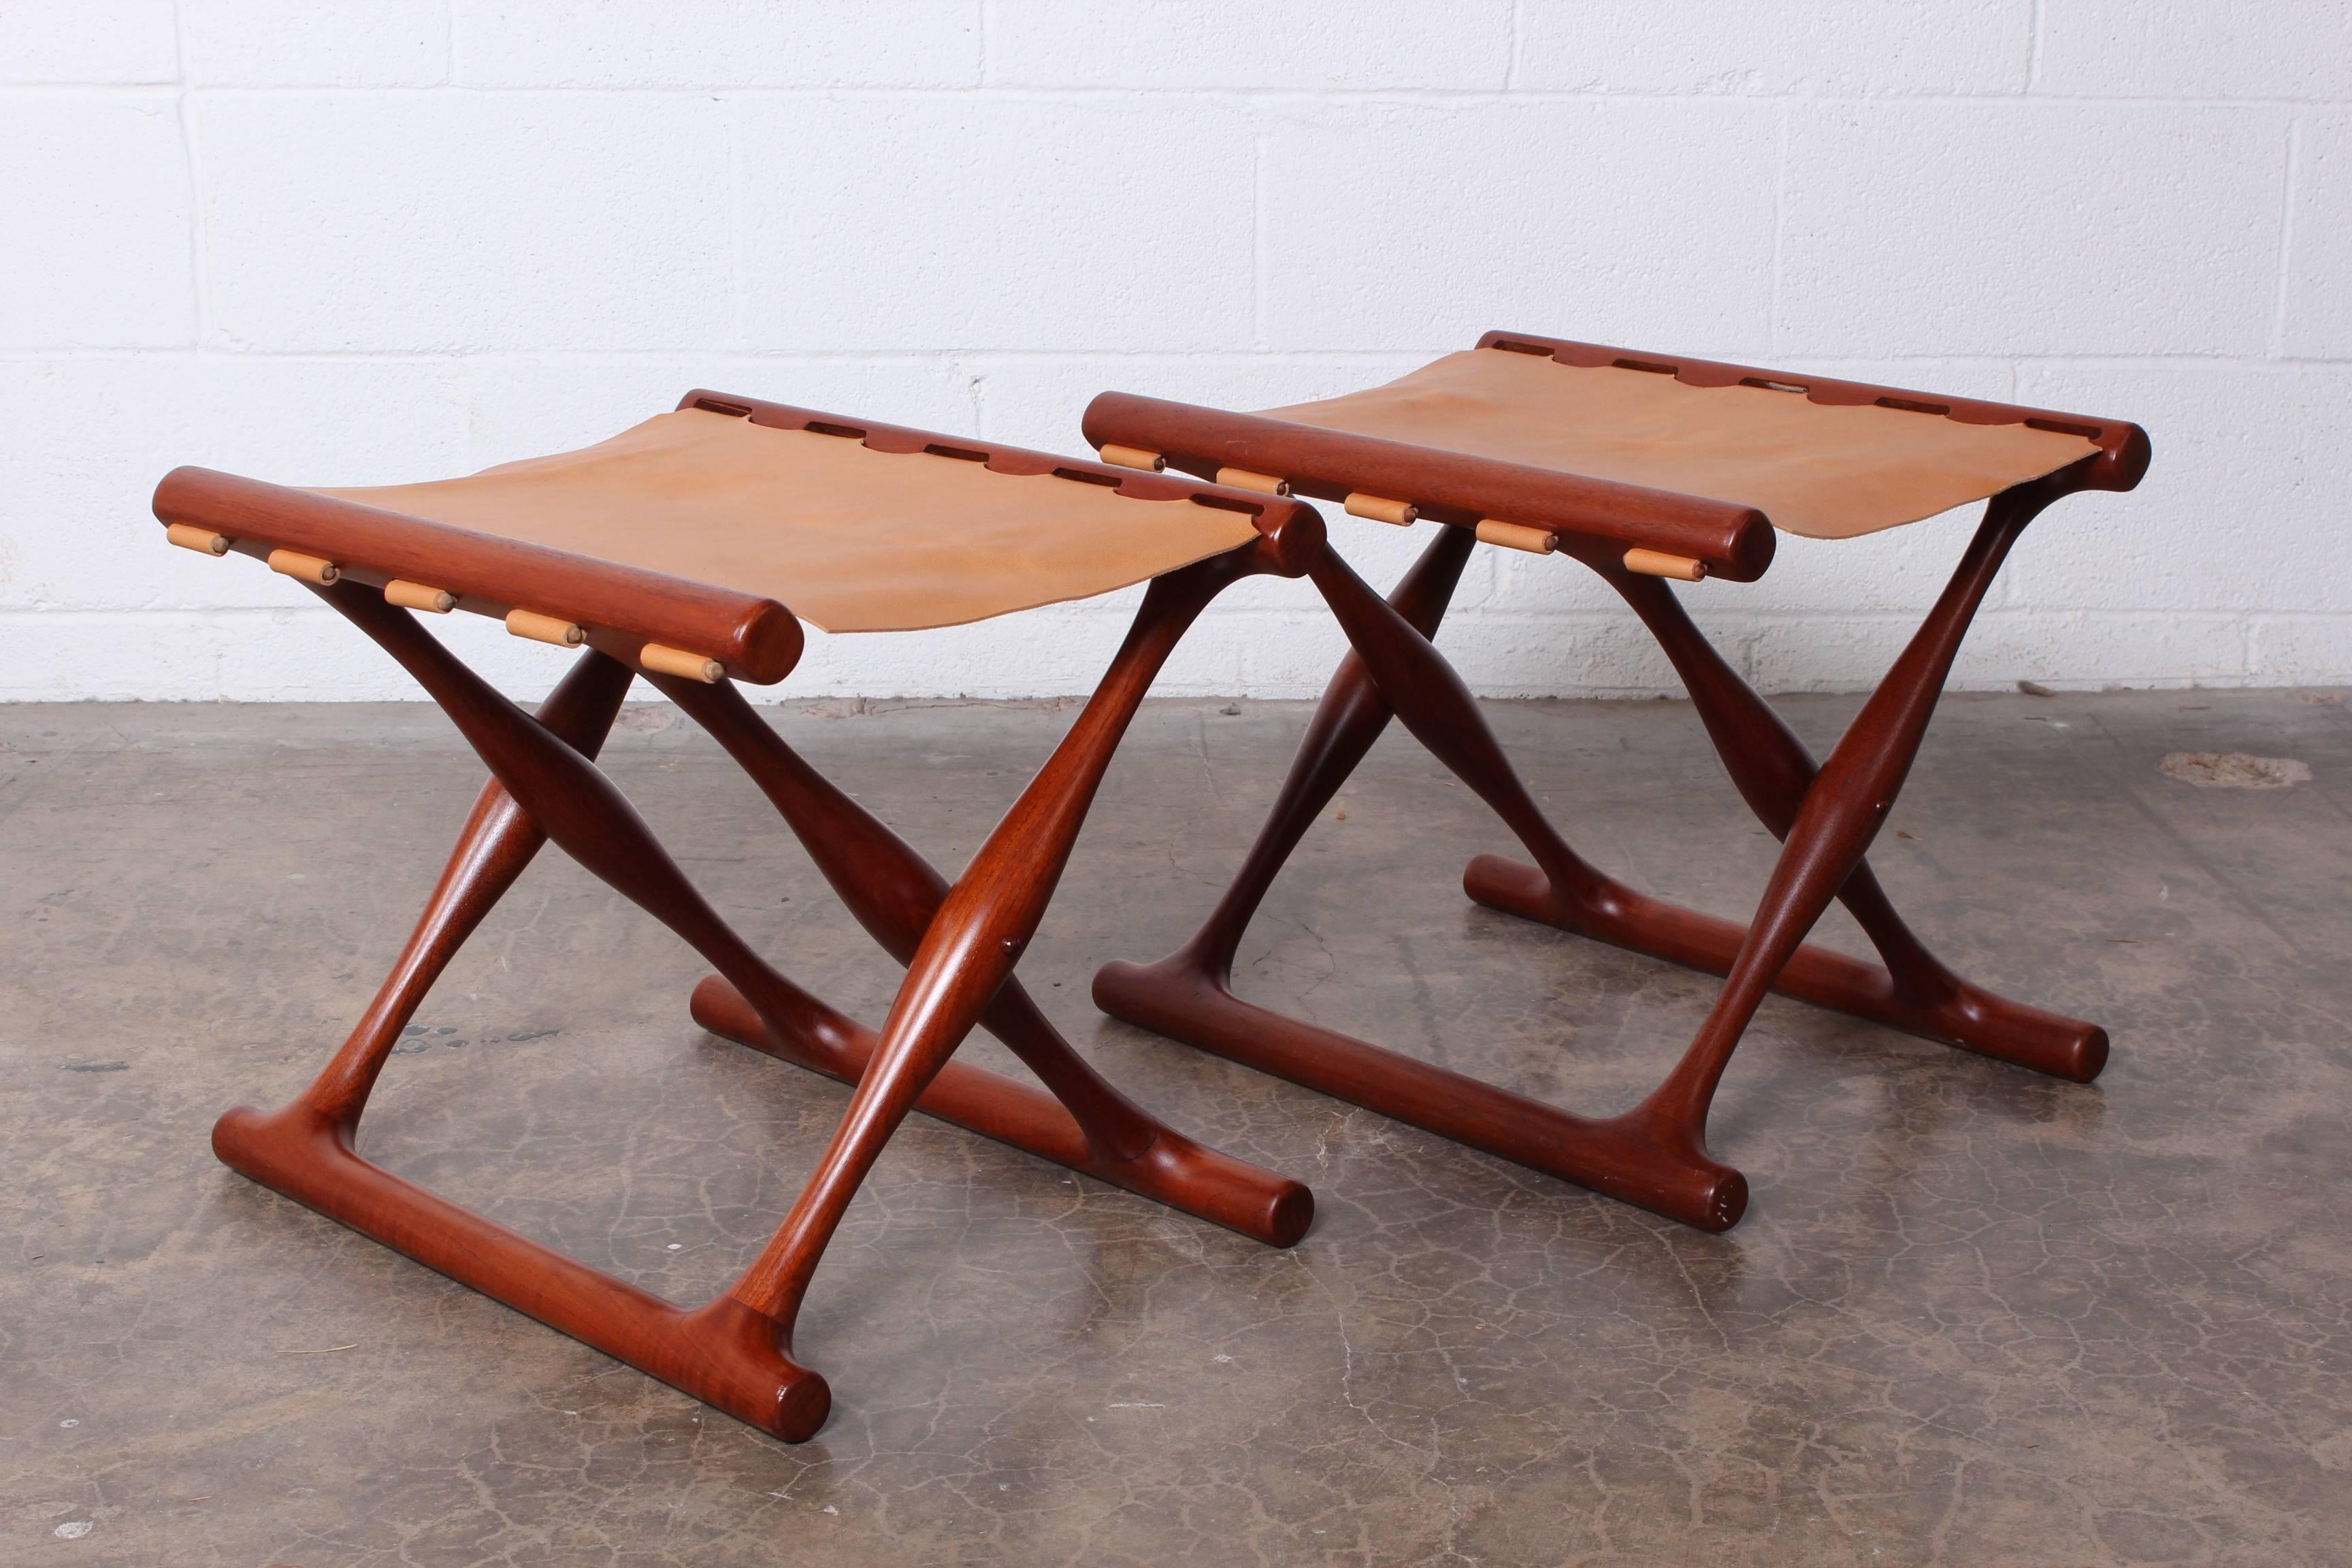 Pair of Teak and Leather Folding Stools by Poul Hundevad 1